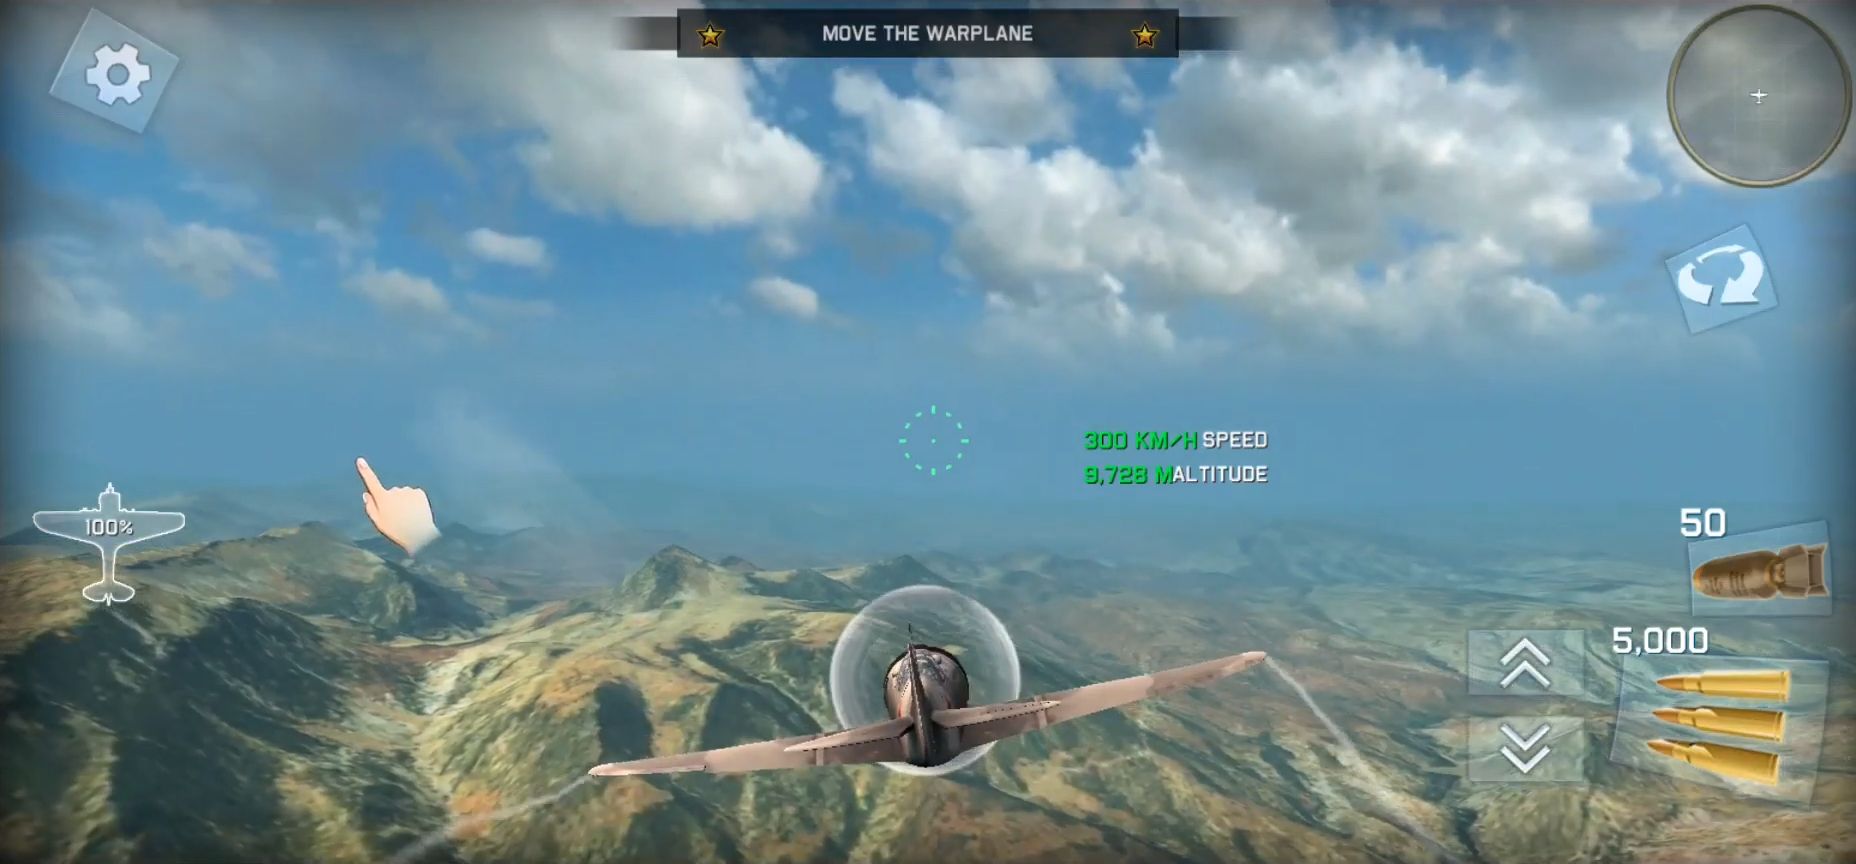 Gameplay of the Ace Squadron: WWII Conflicts for Android phone or tablet.